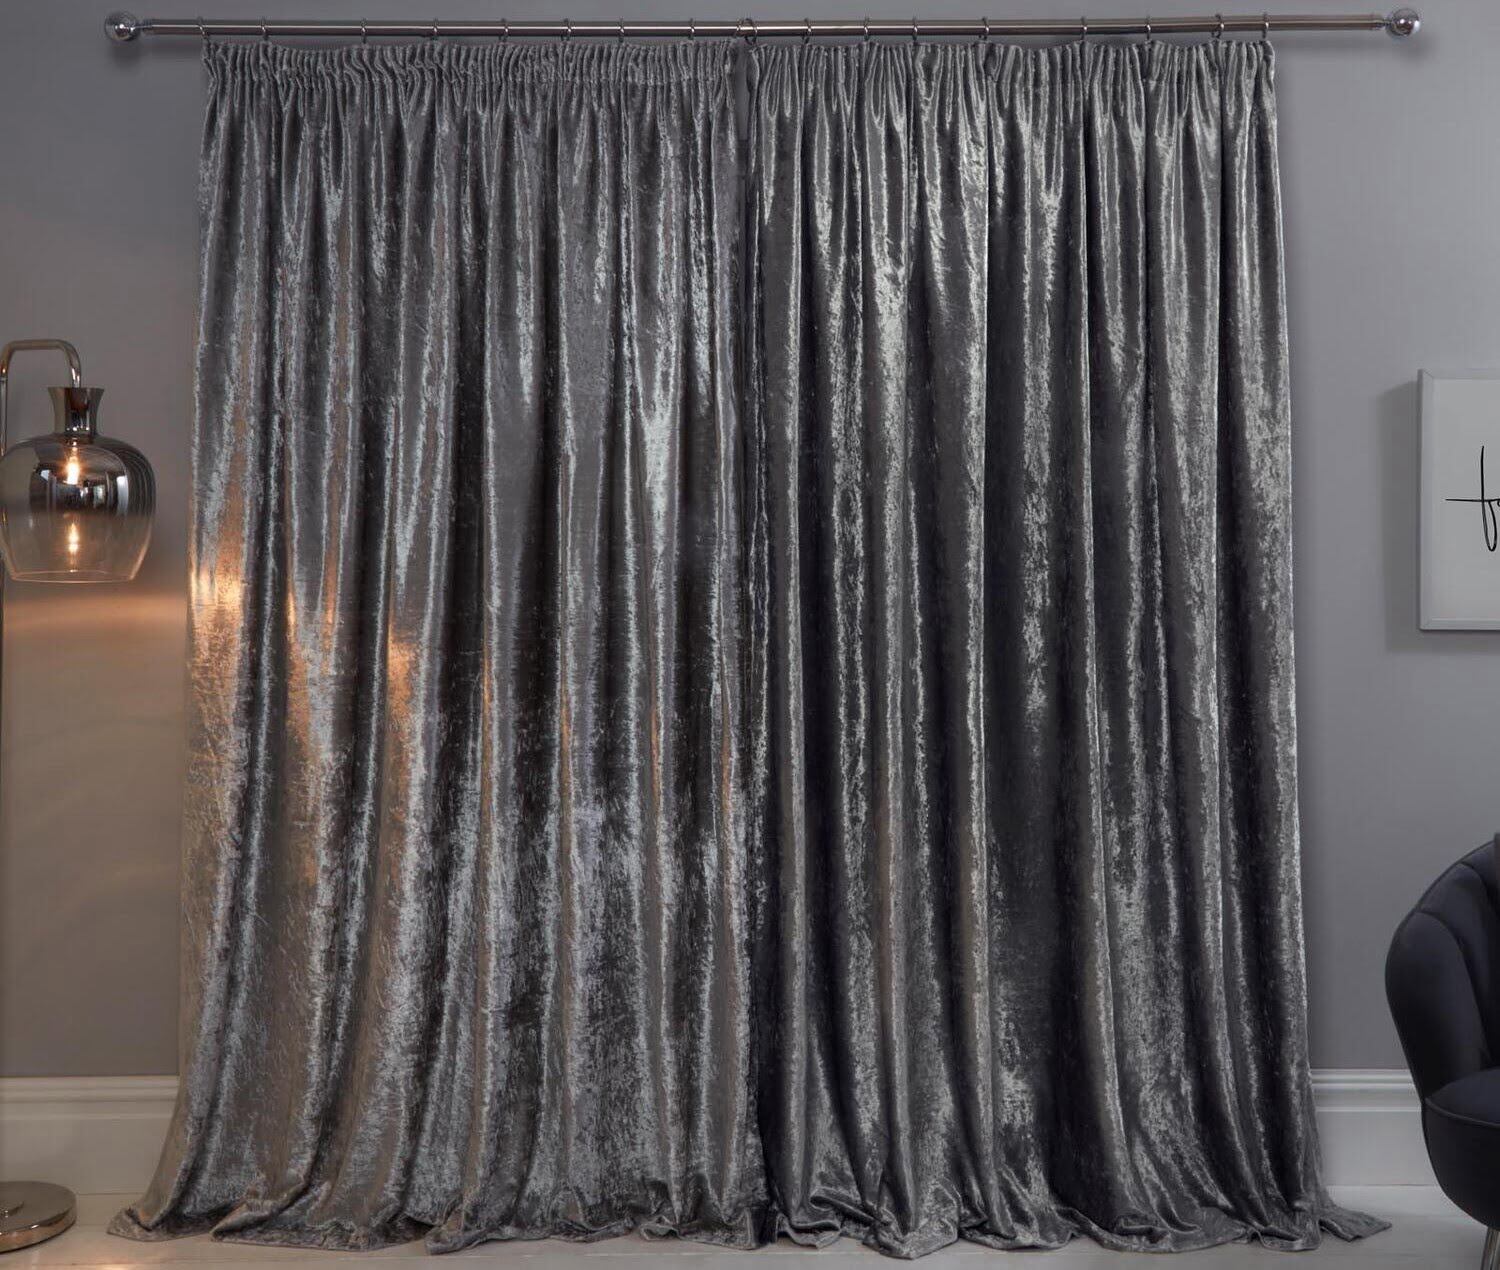 How To Wash Velvet Curtains